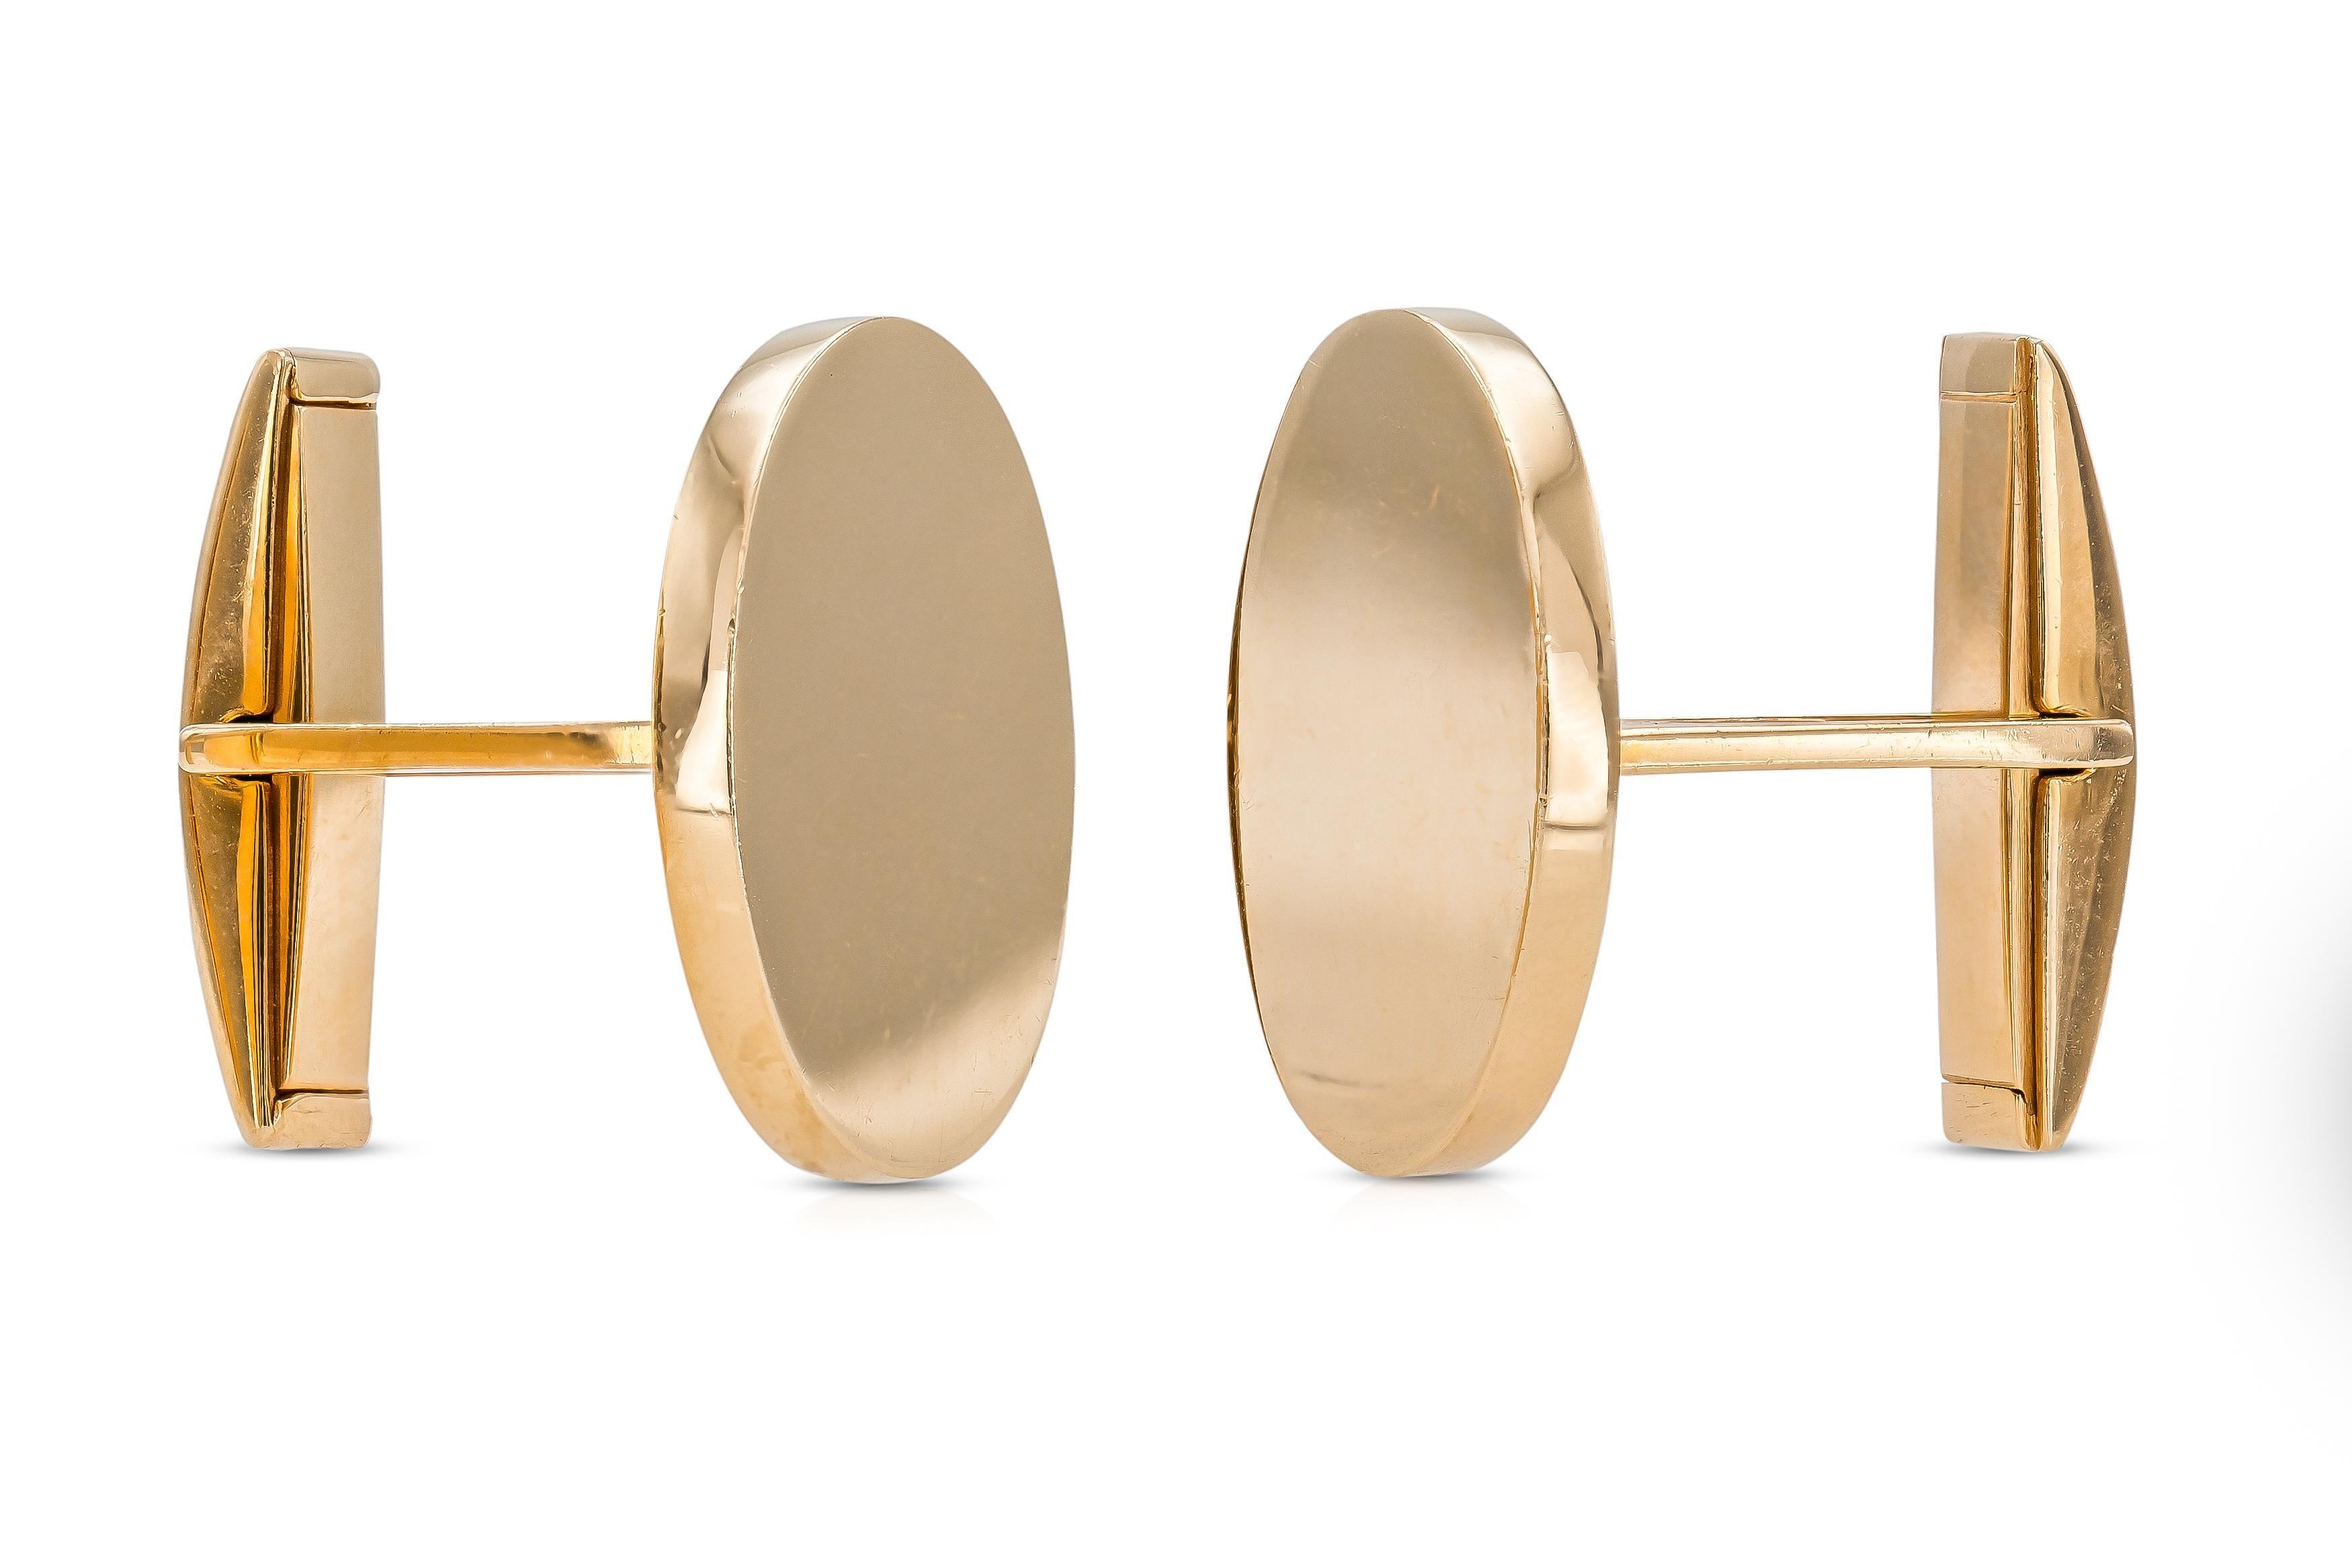 Vintage 1960s Gold Cufflinks In Good Condition For Sale In New York, NY